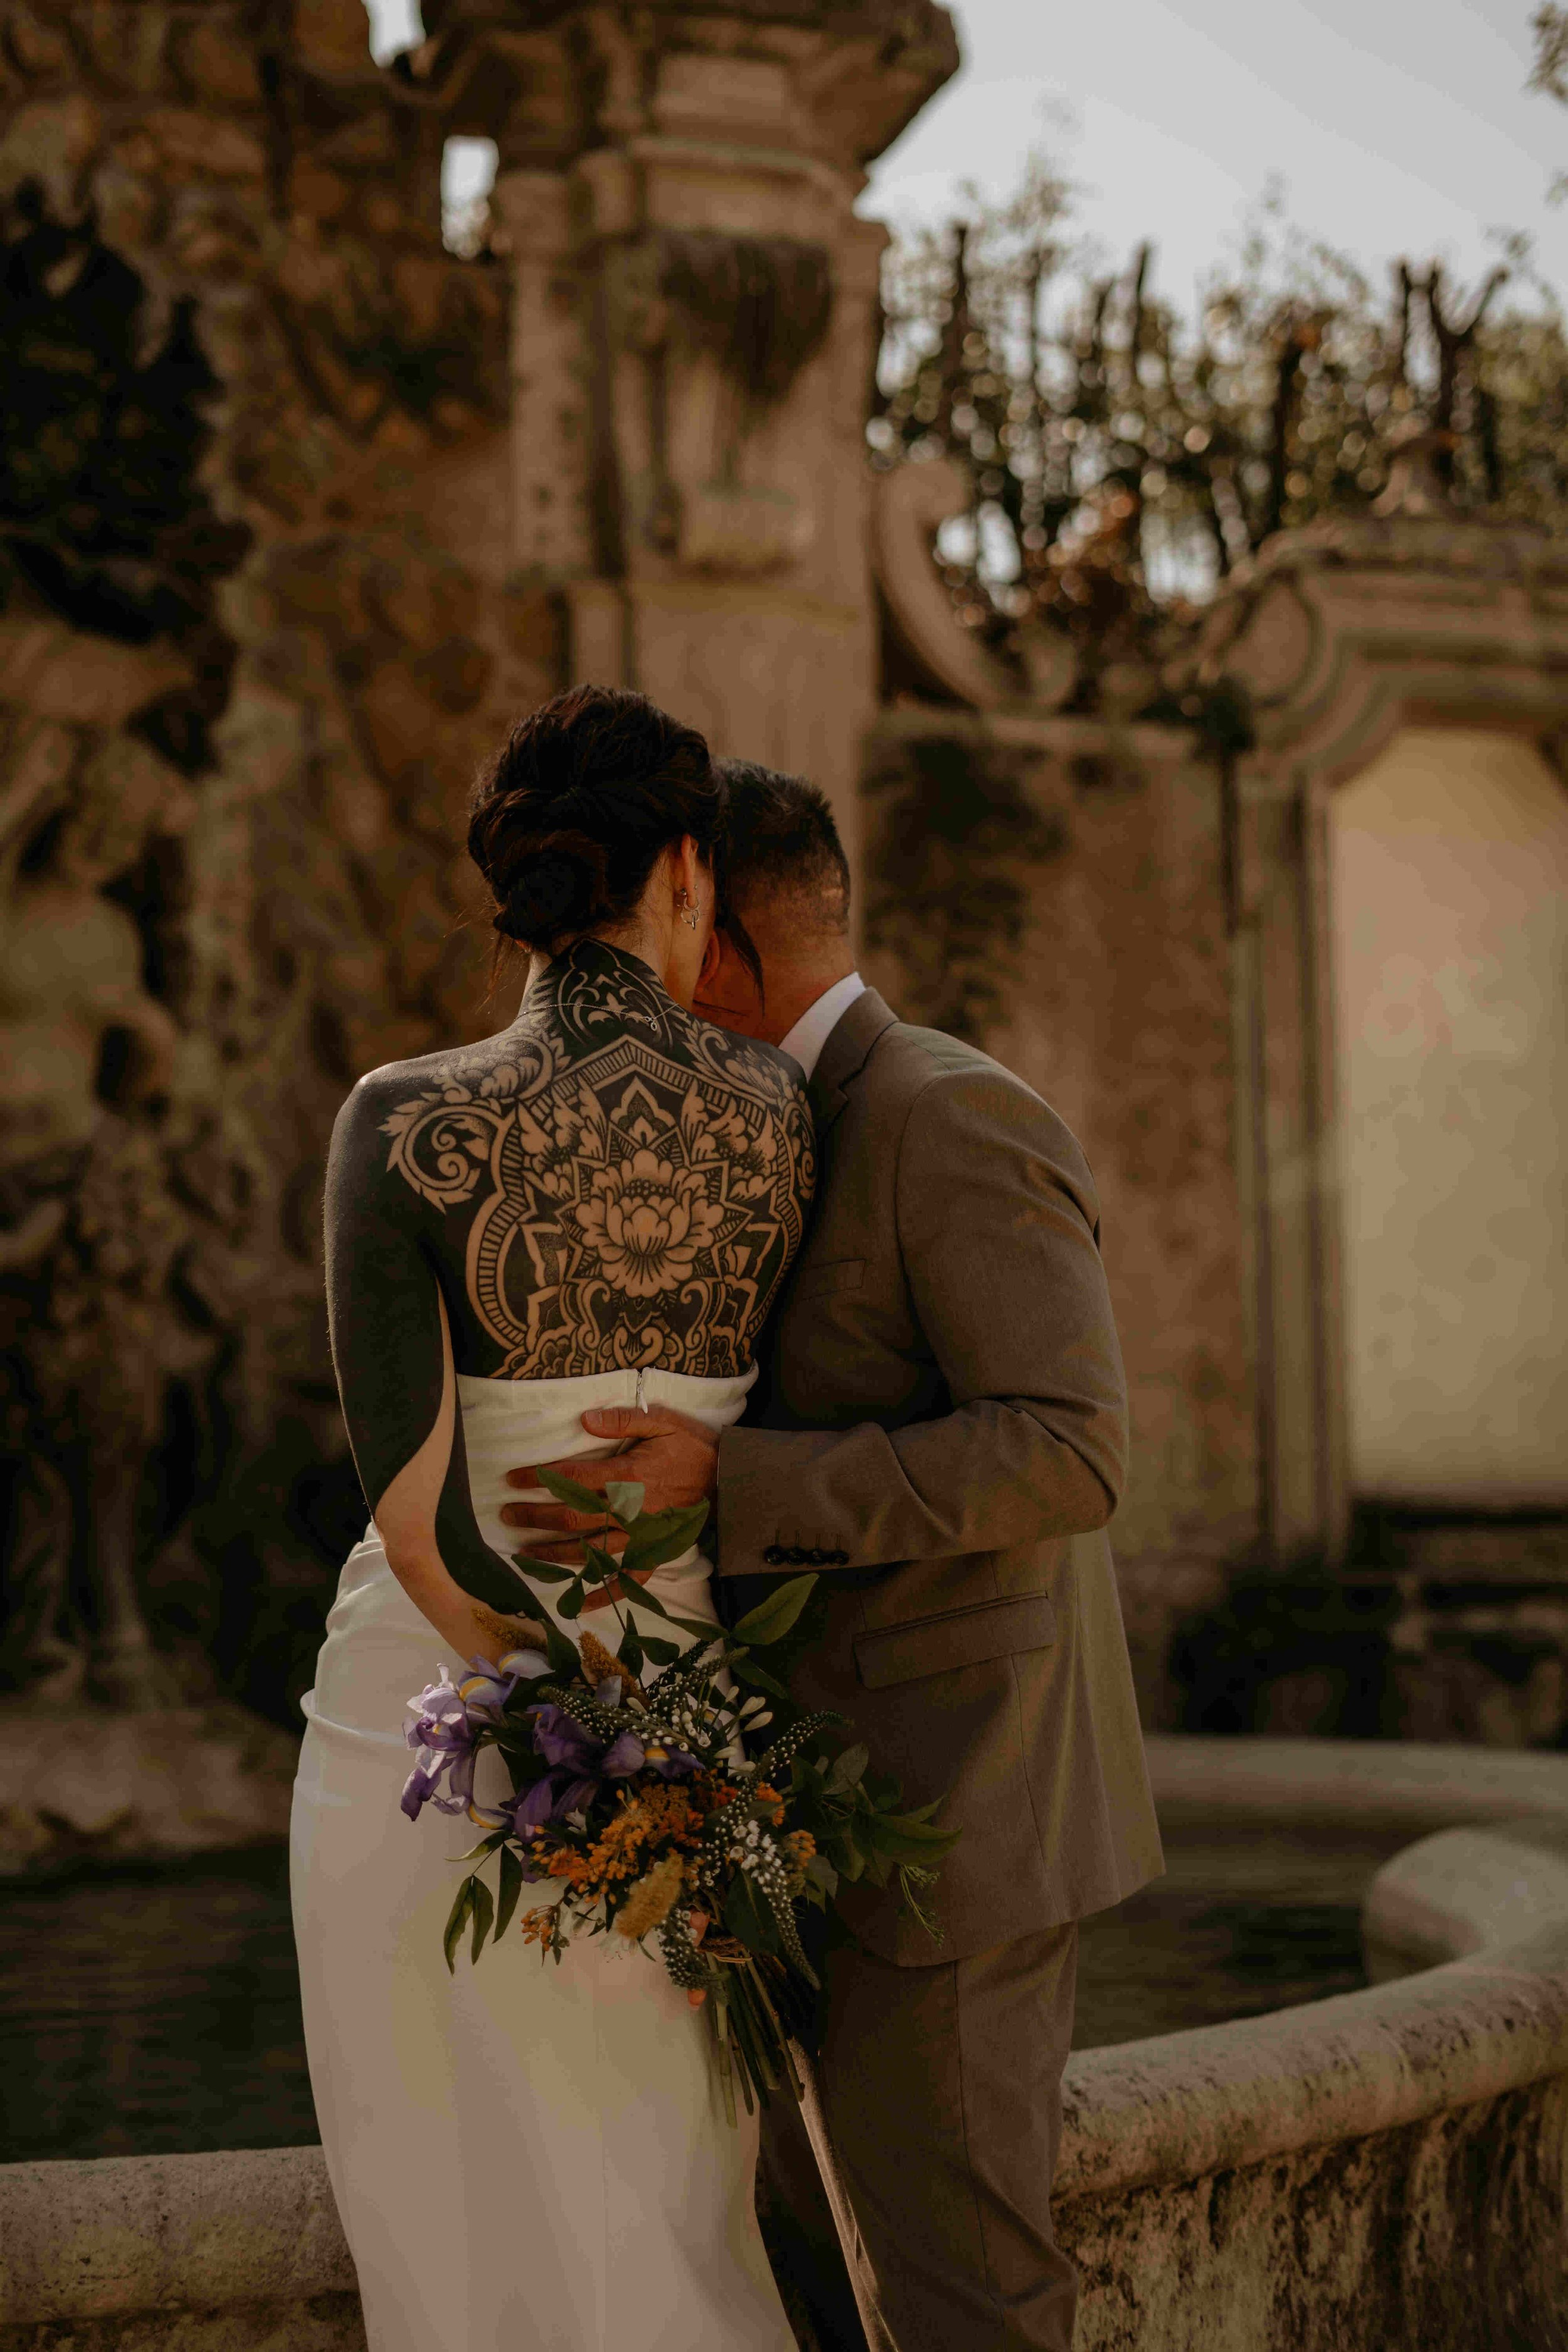  A photo of a bride and groom with their backs to the camera in a sunny destination. The bride has a low back dress and you can see her full back tattoo. 